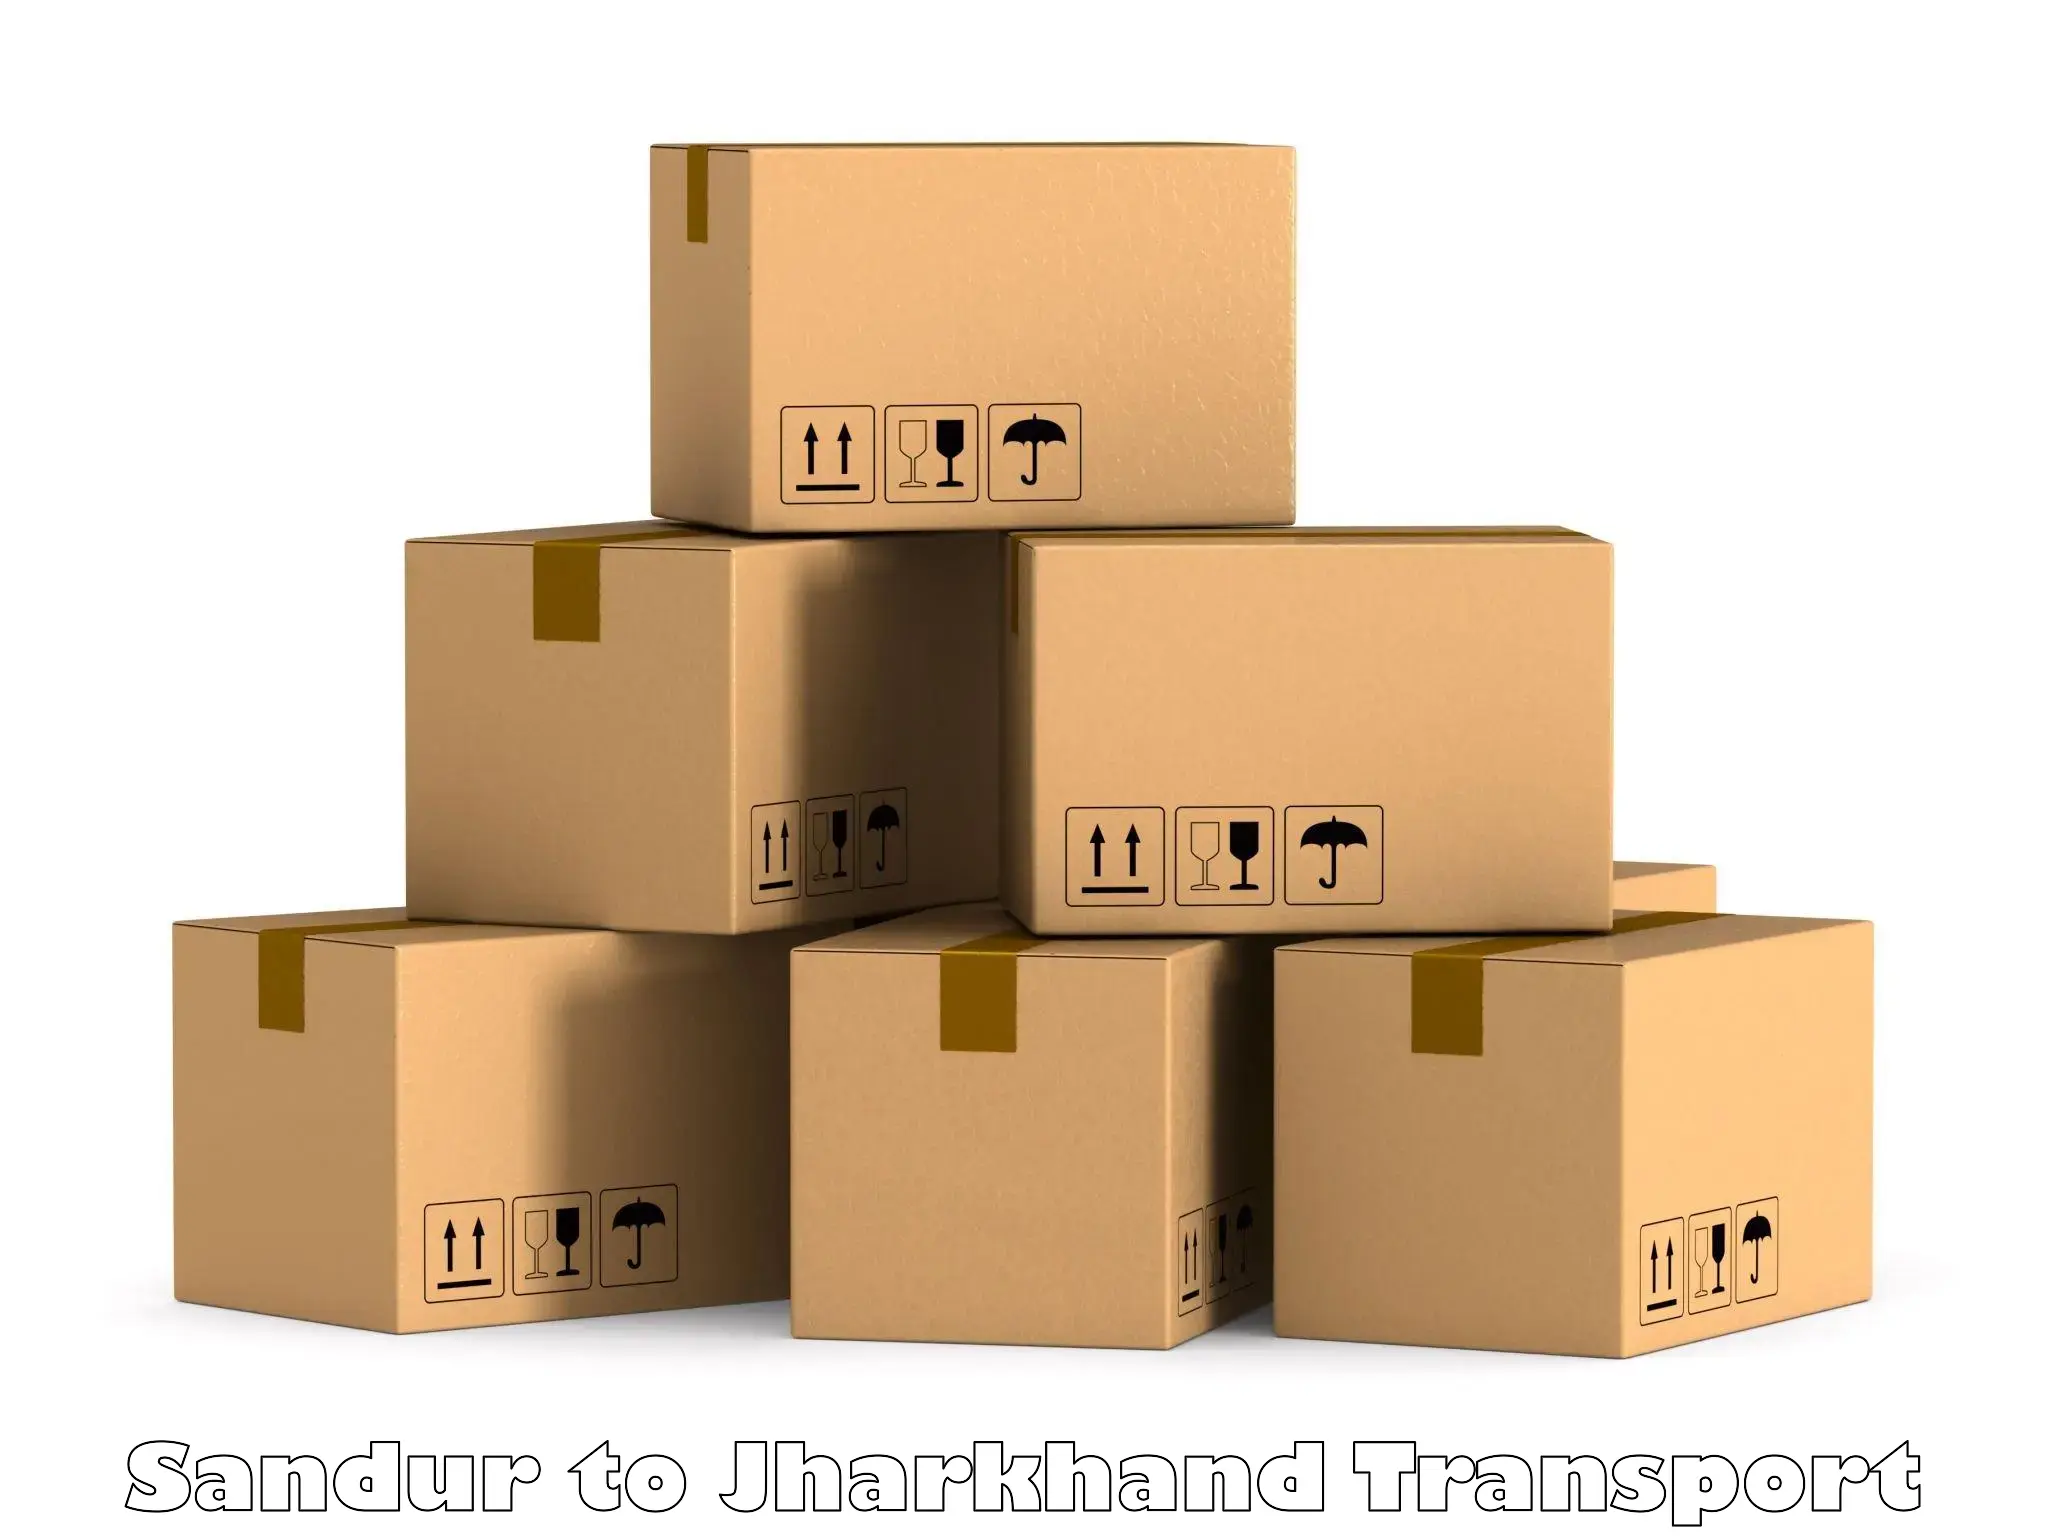 Part load transport service in India Sandur to Chandwa